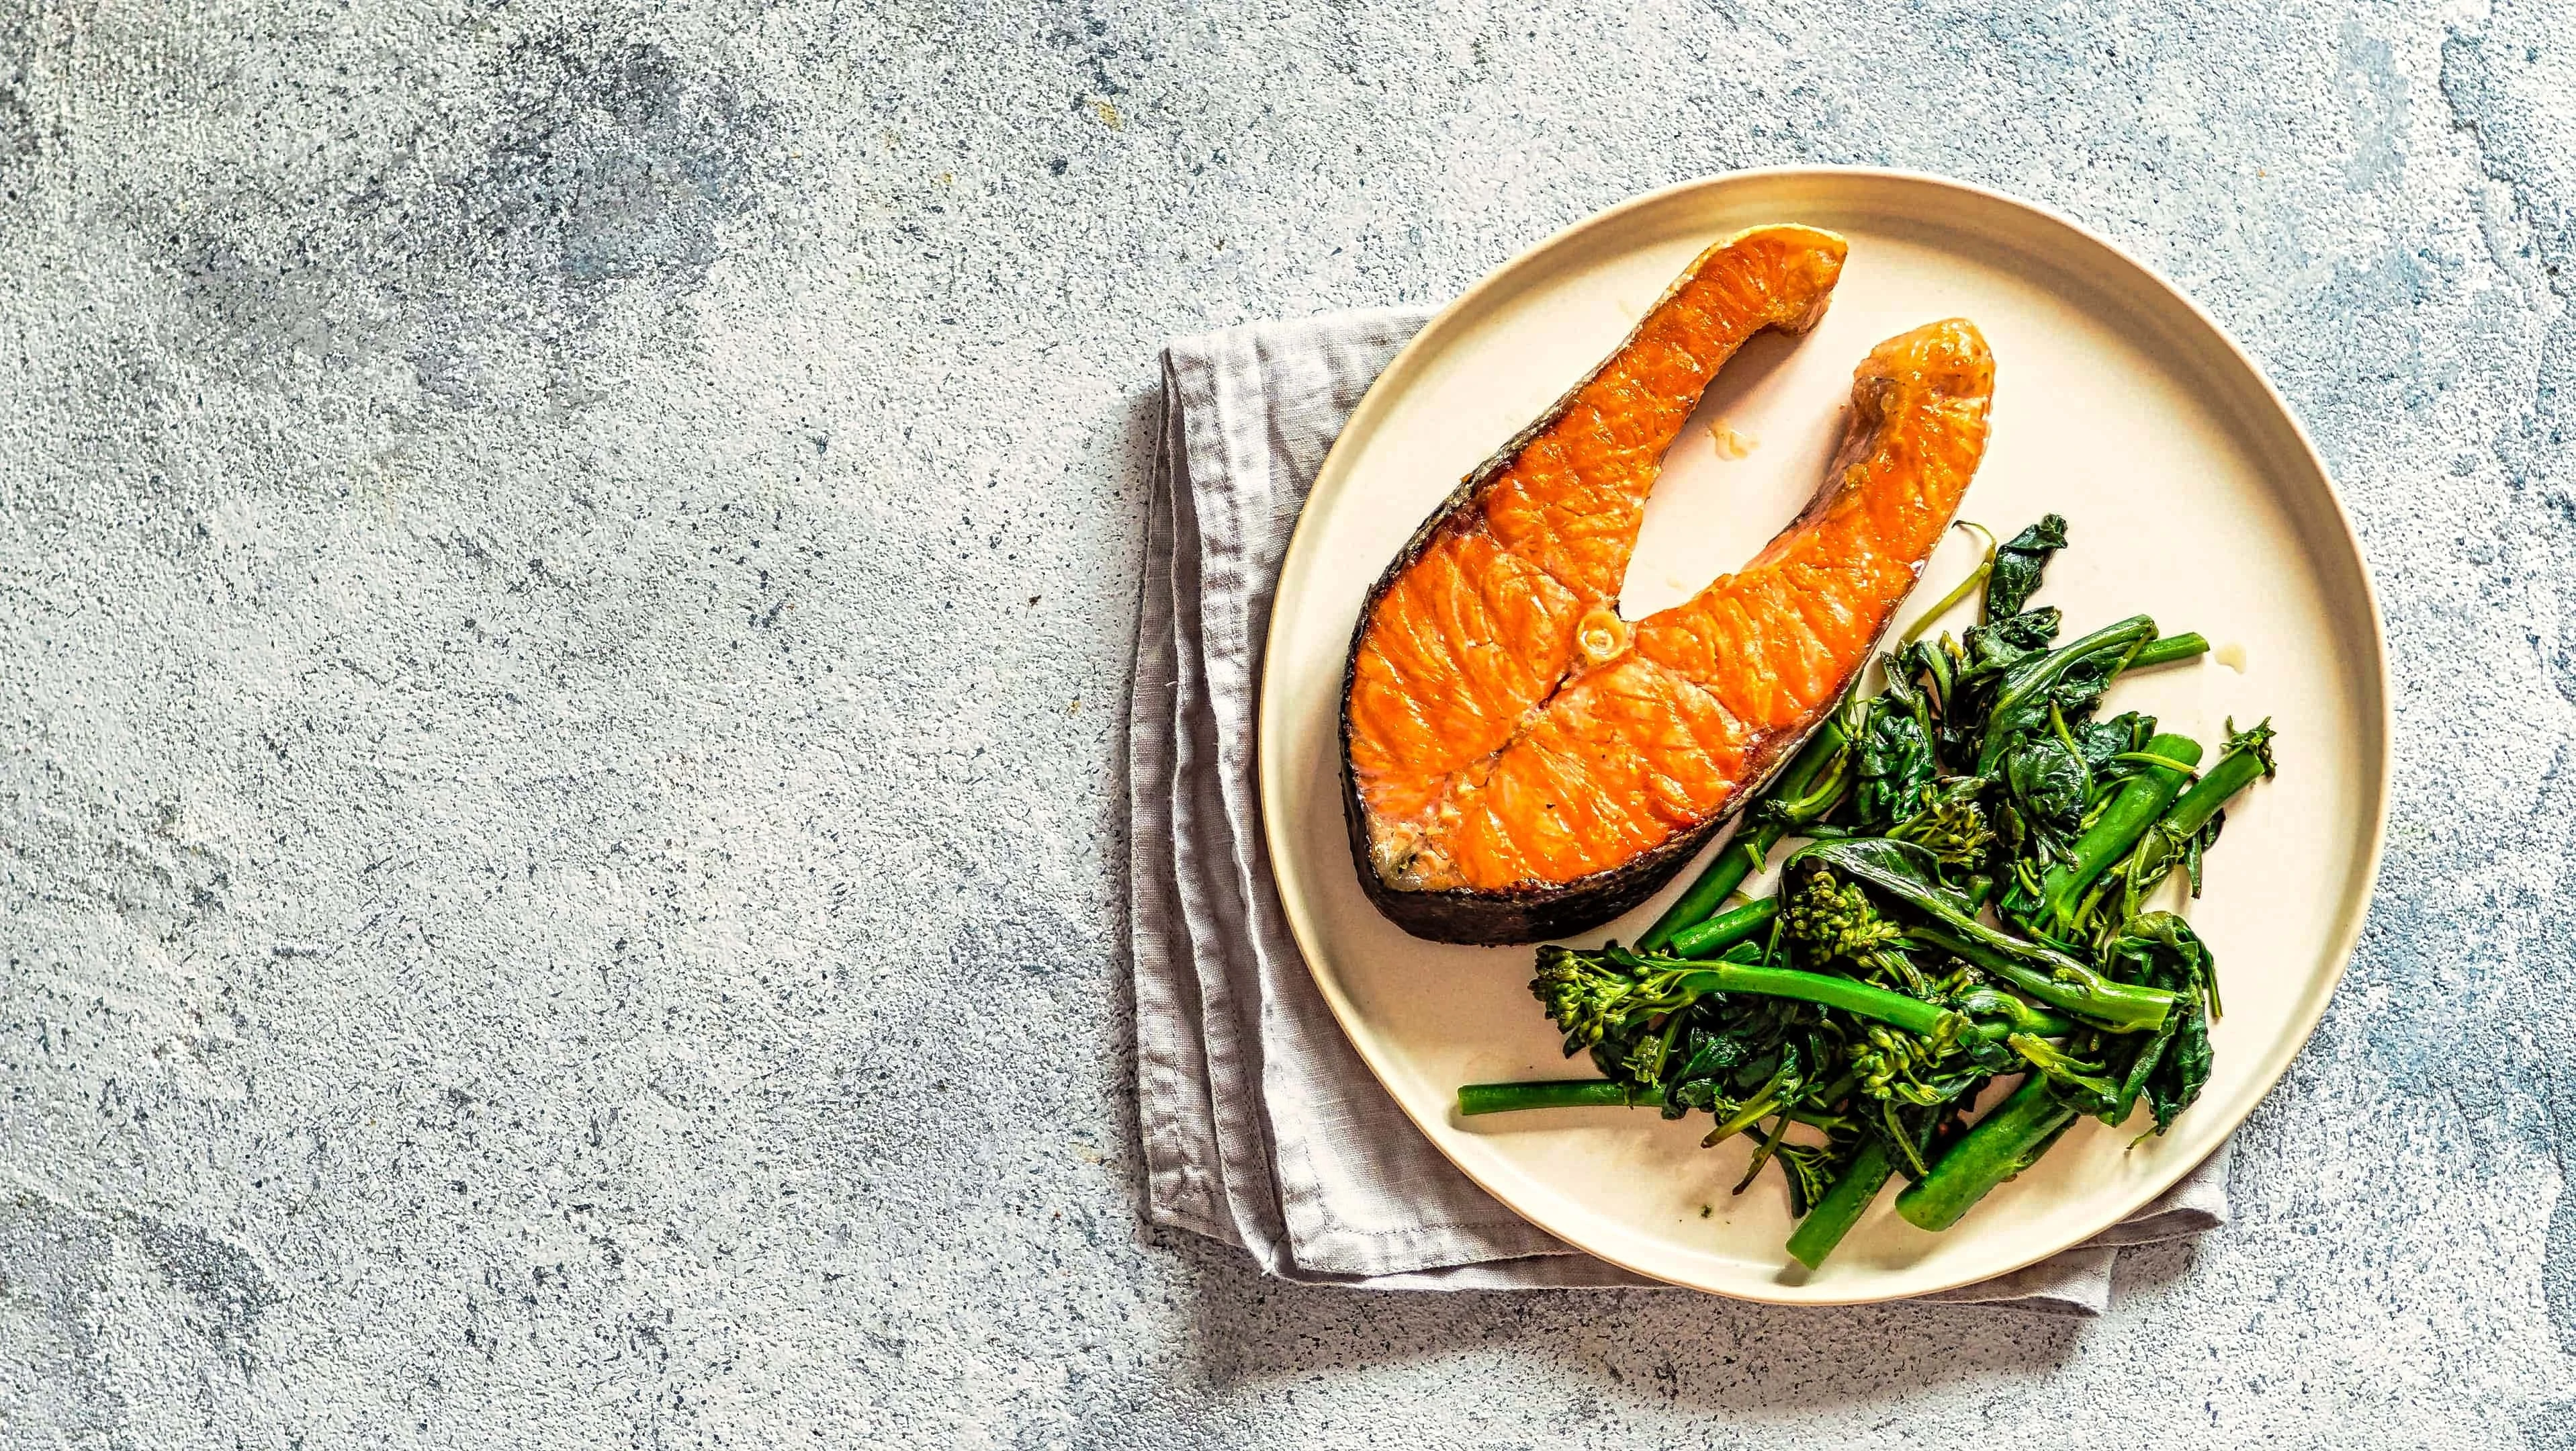 Grilled salmon steak and broccolini